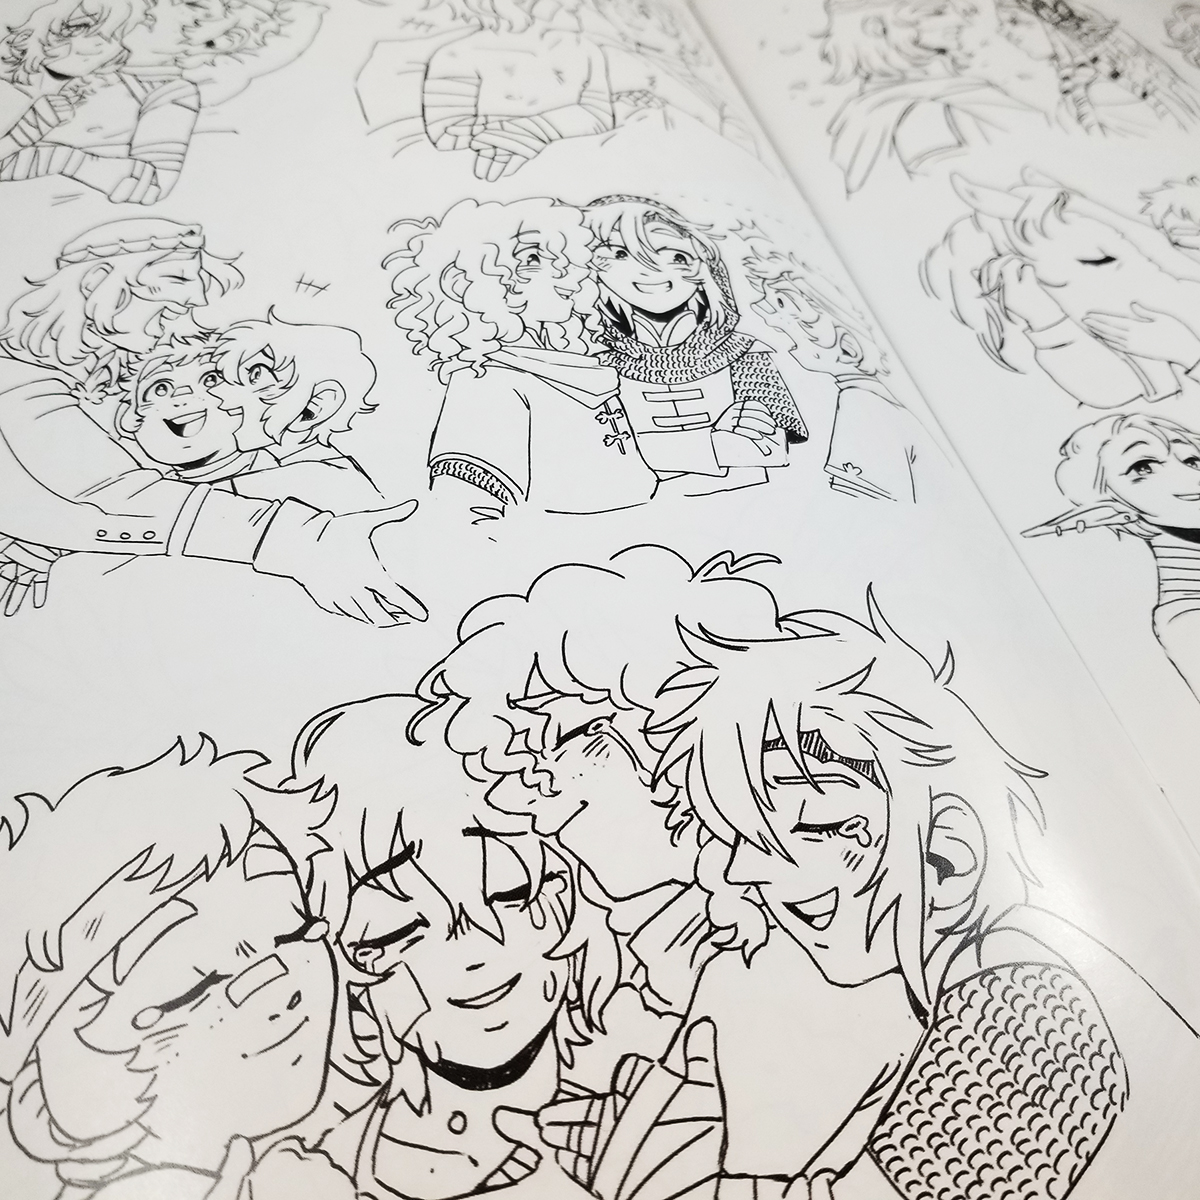 and lastly ZINES
- gay samfro risograph comic
- my lotr sketches compiled into two zines 